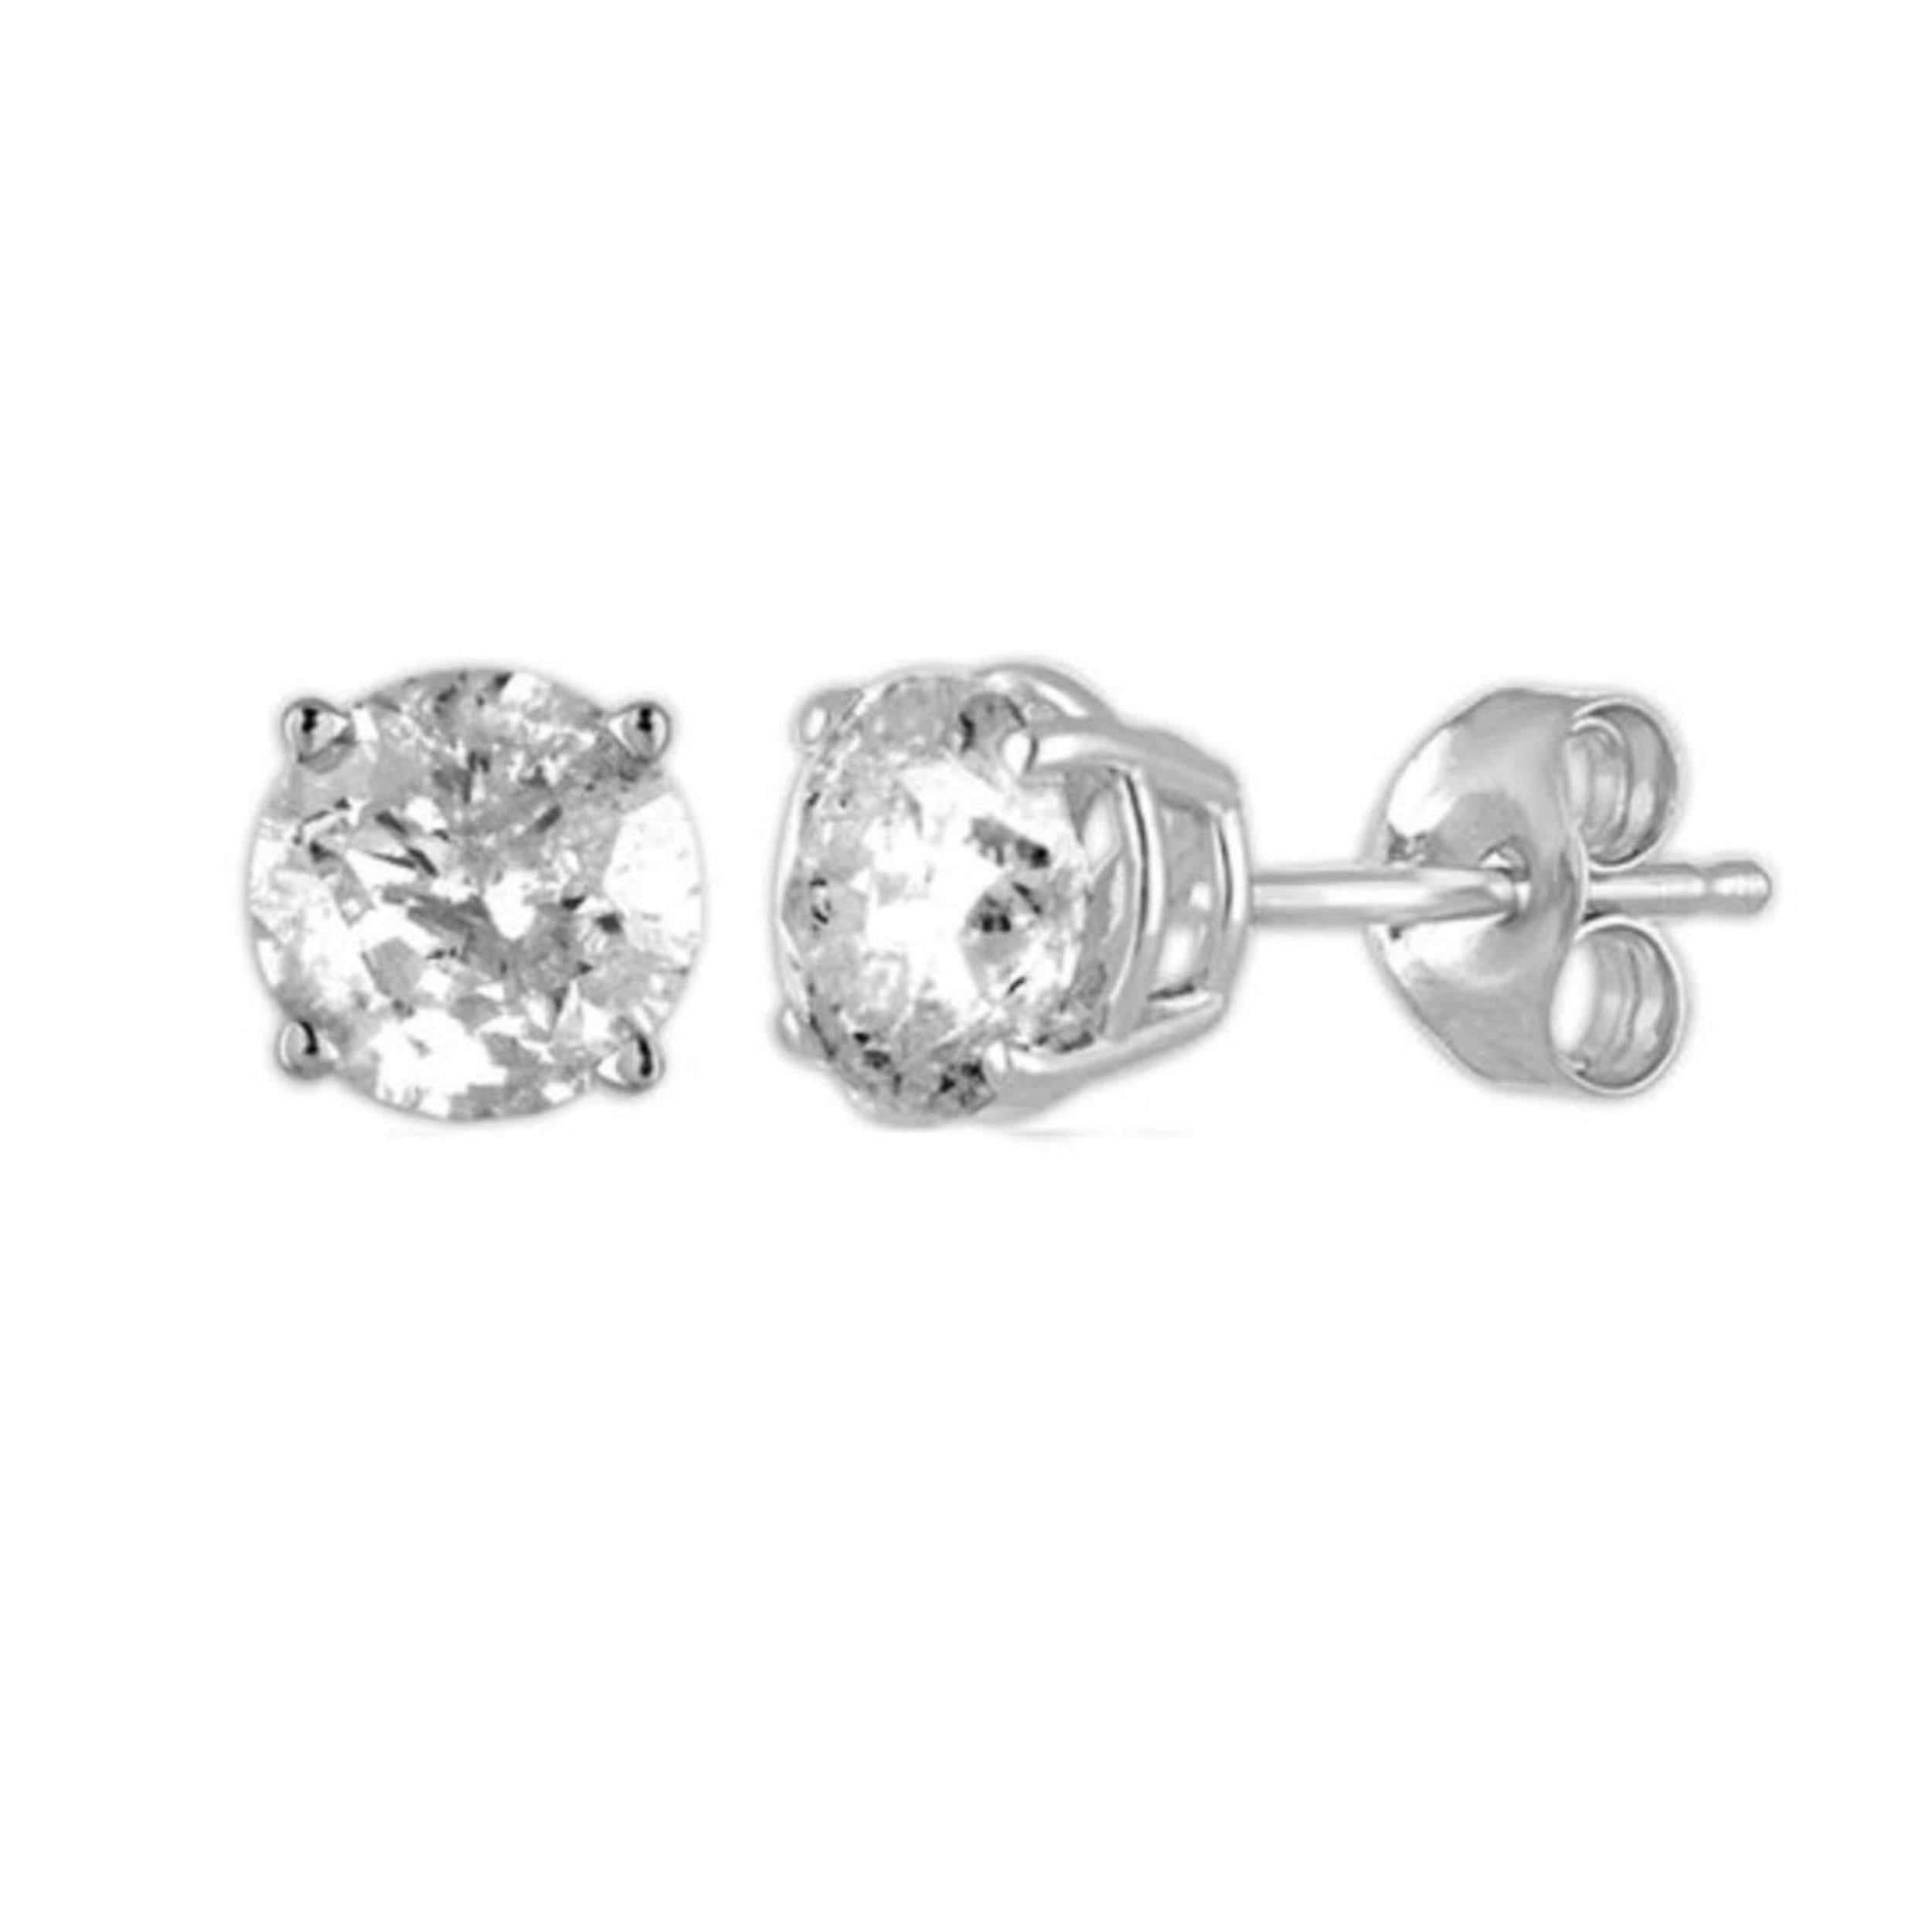 14Kt White Gold 0.75 Ct Genuine Natural Diamond Round Stud Earrings